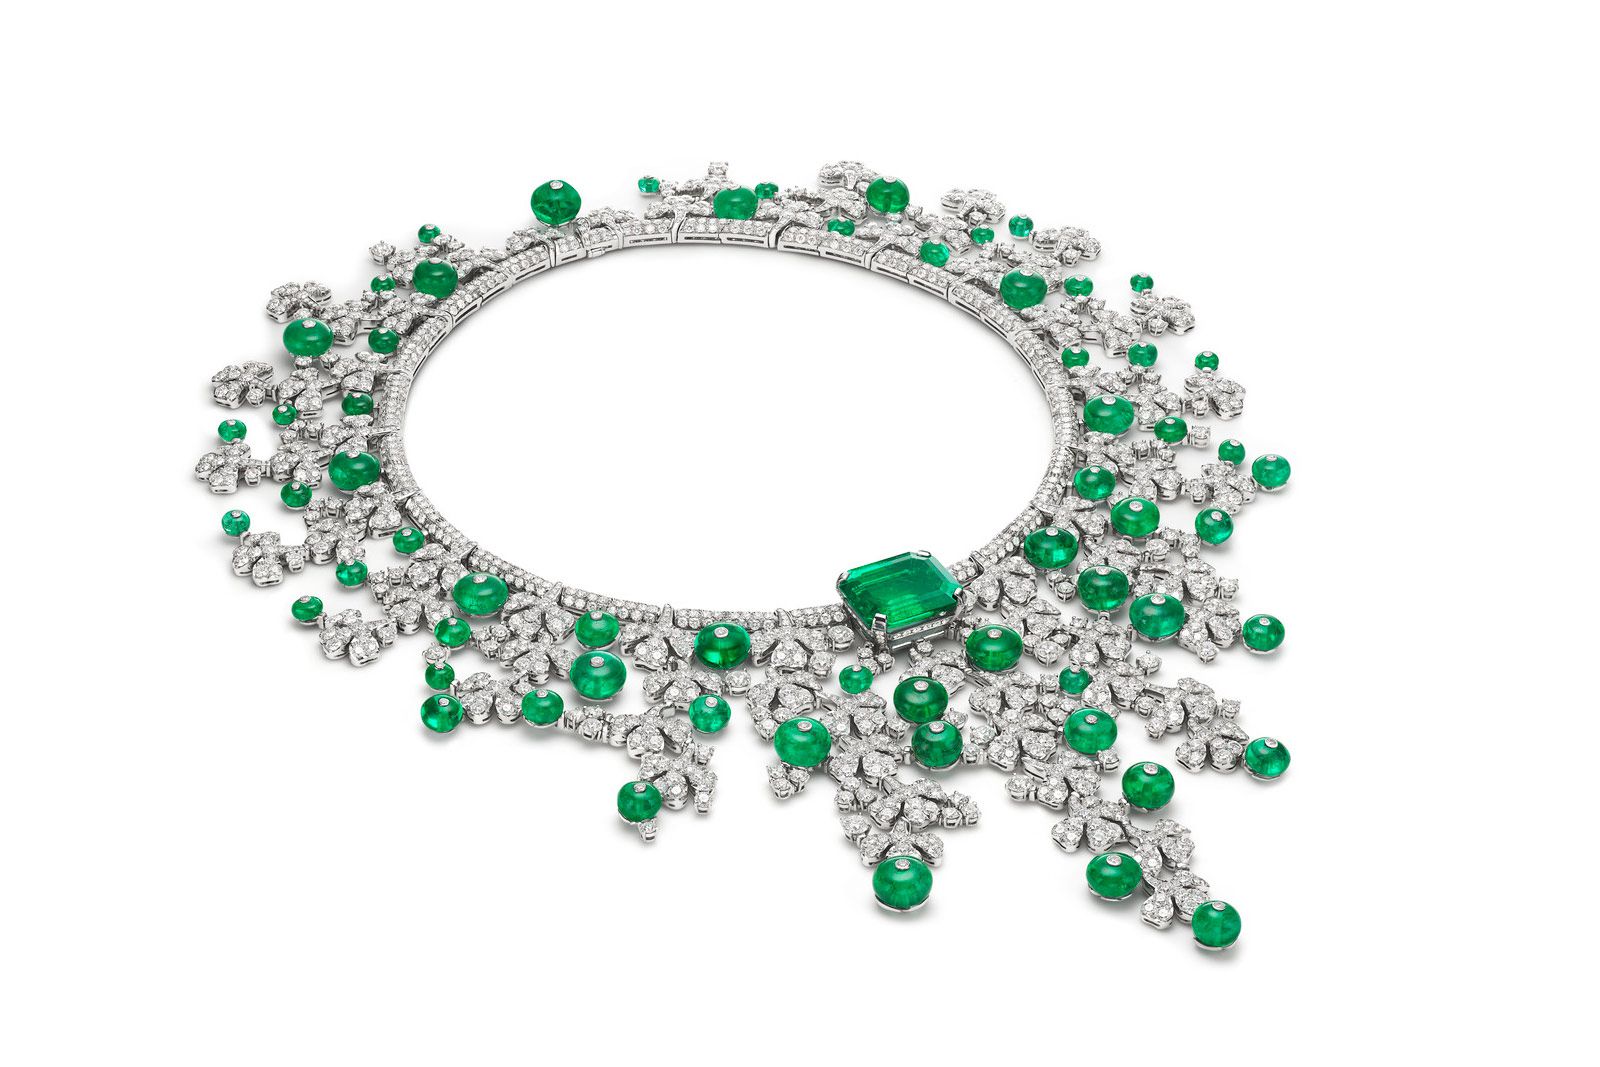 Bulgari's New High Jewelry Collection Is an Ode to the Garden of